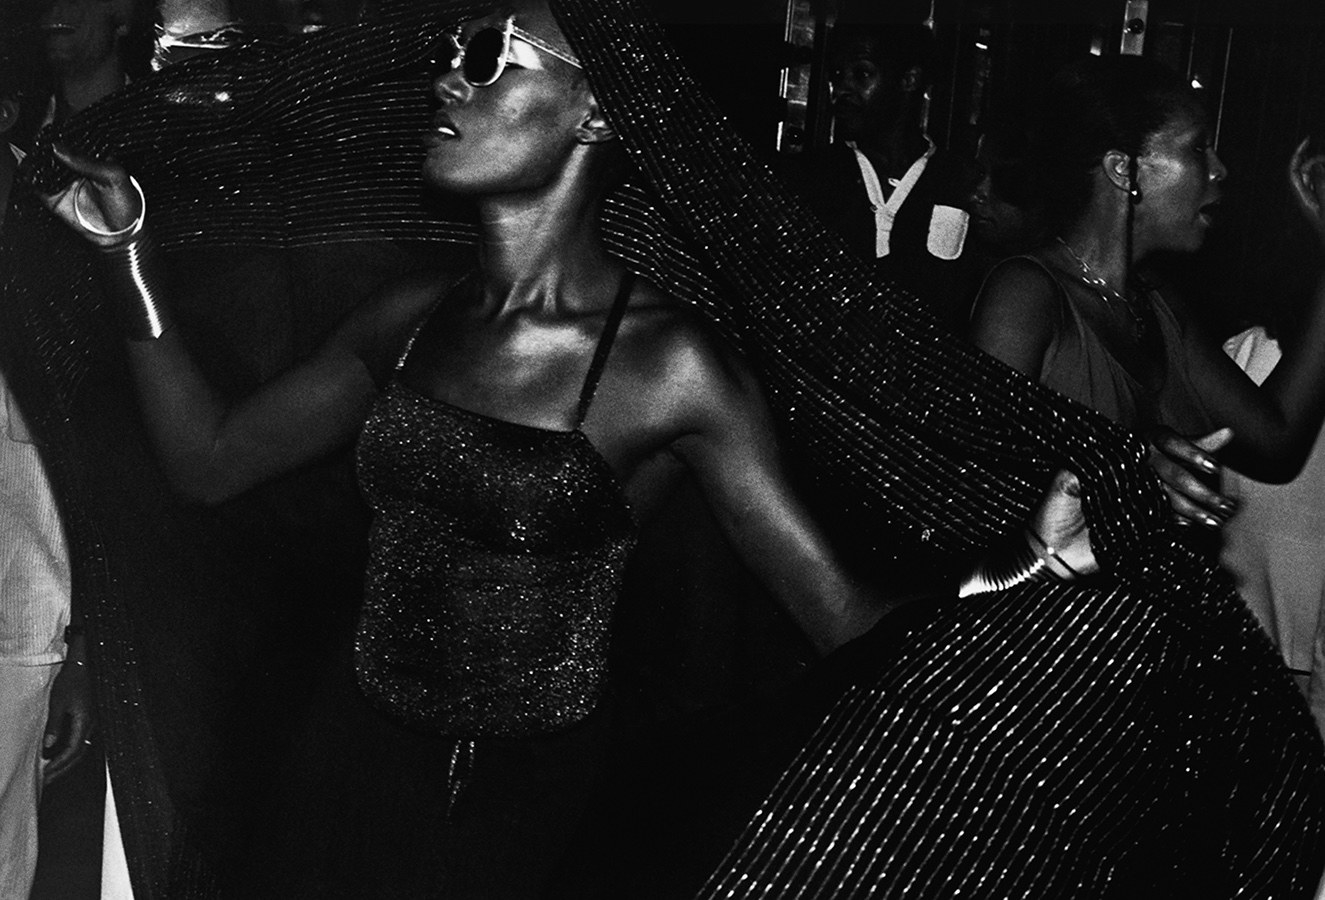 Grace Jones in a sparkly top and wrap dancing with sunglasses, people in the background